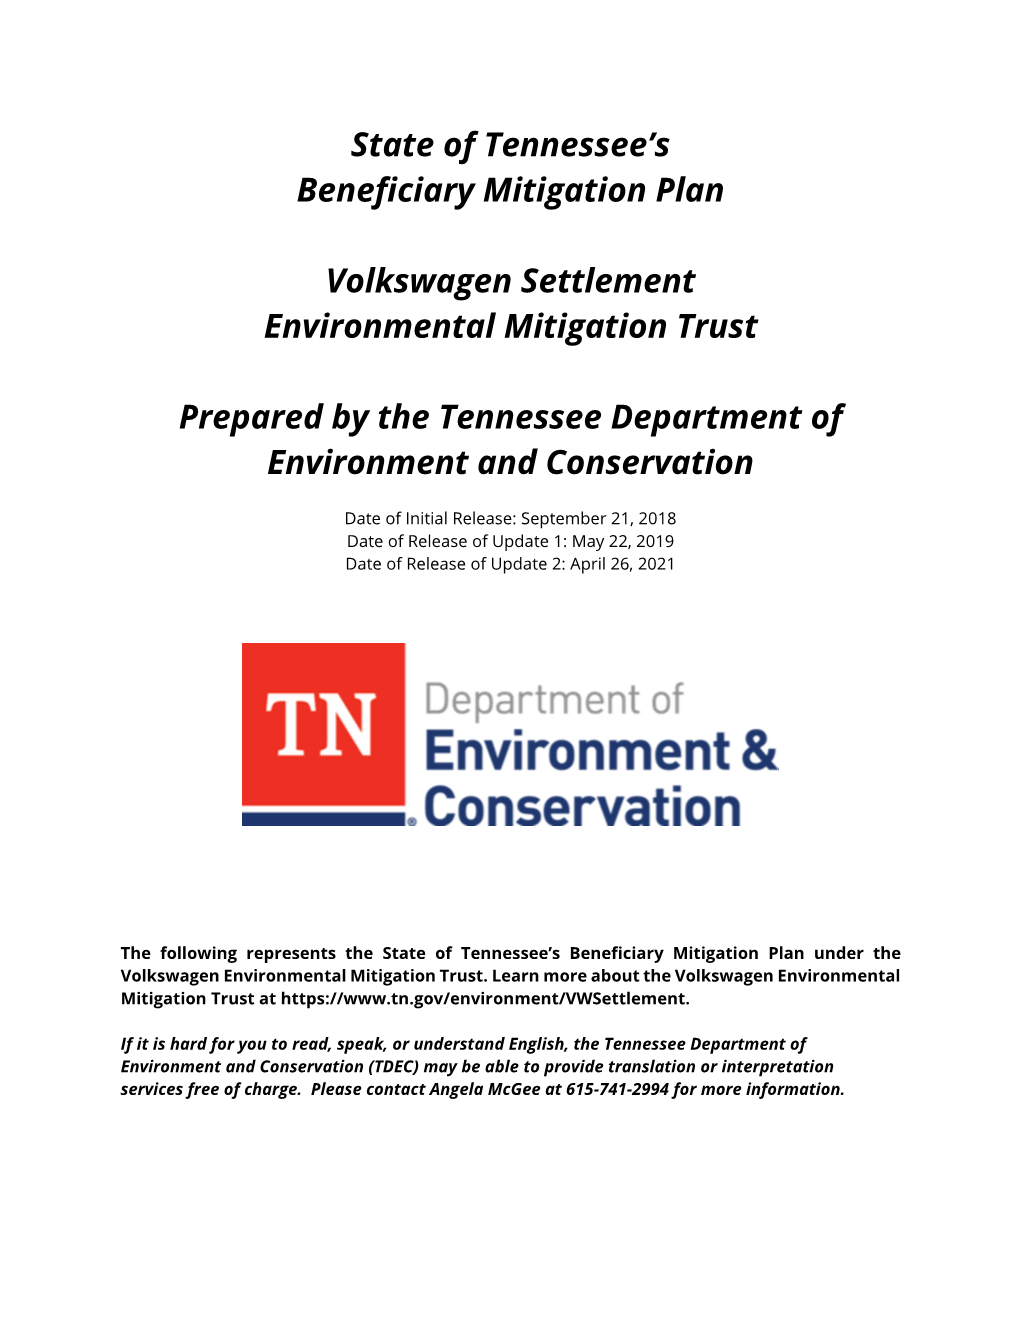 State of Tennessee's Beneficiary Mitigation Plan Volkswagen